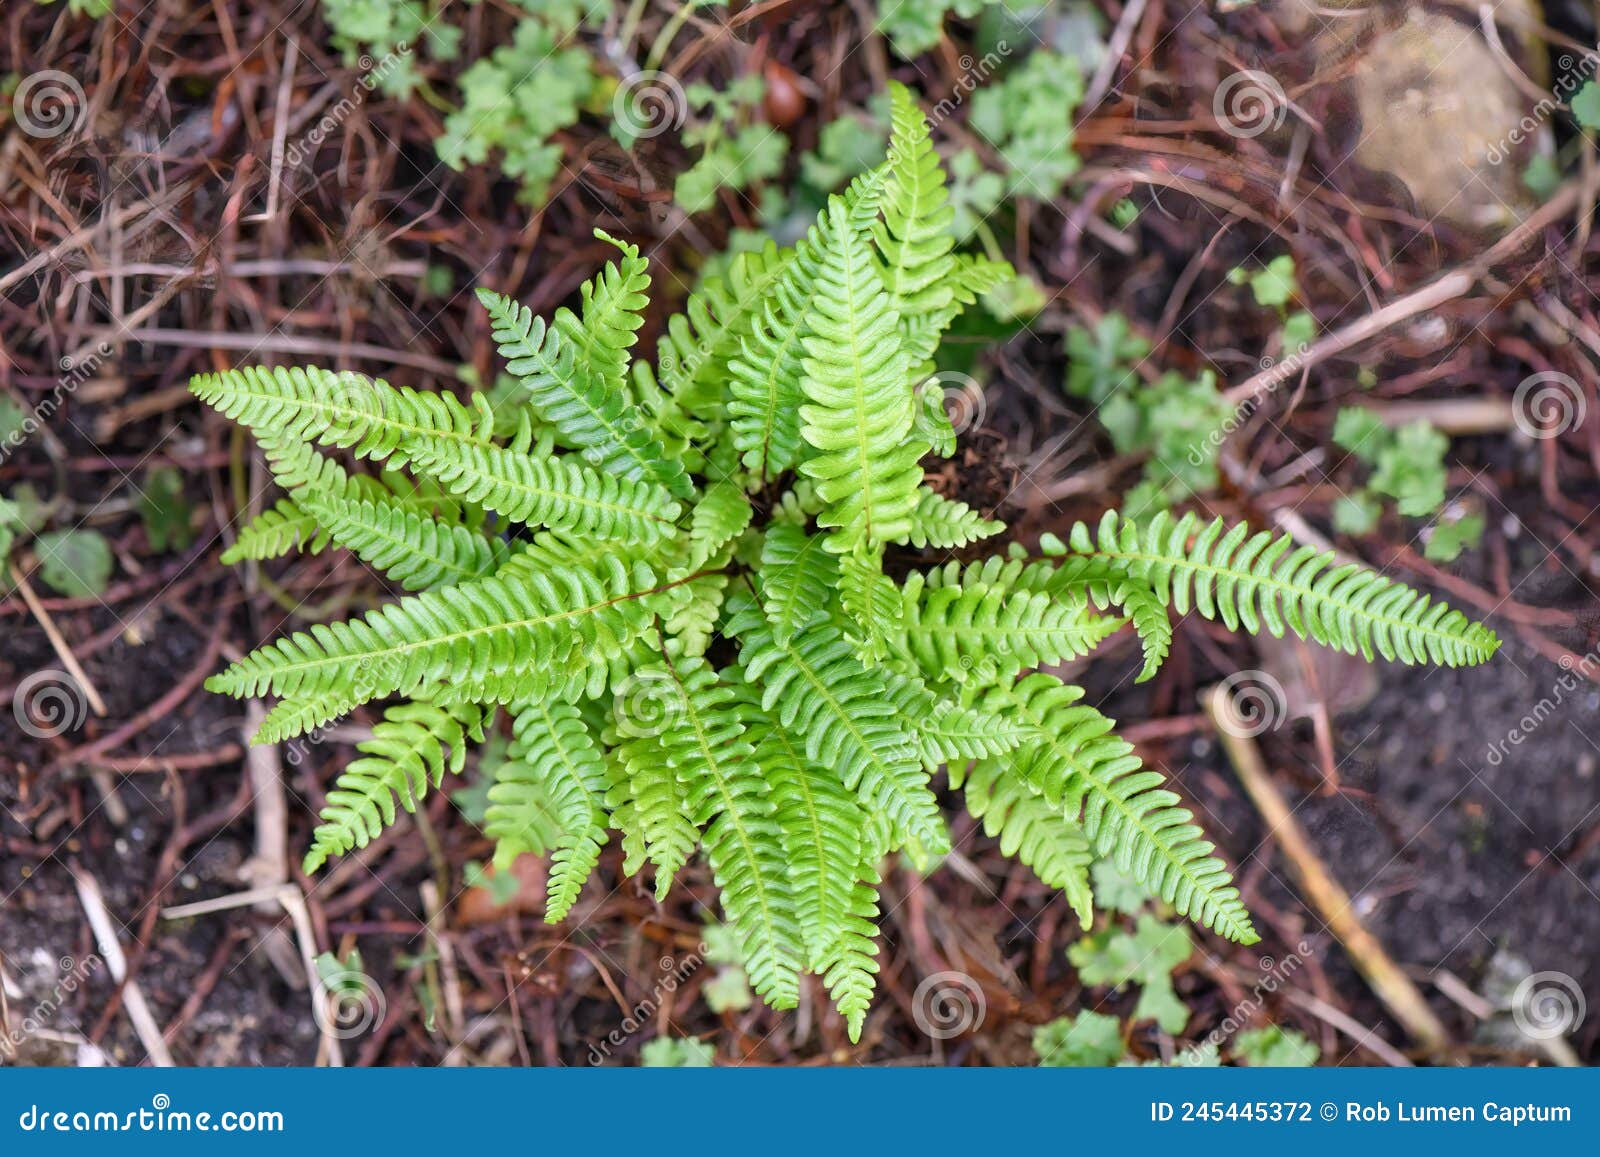 deer fern struthiopteris spicant, plant from above